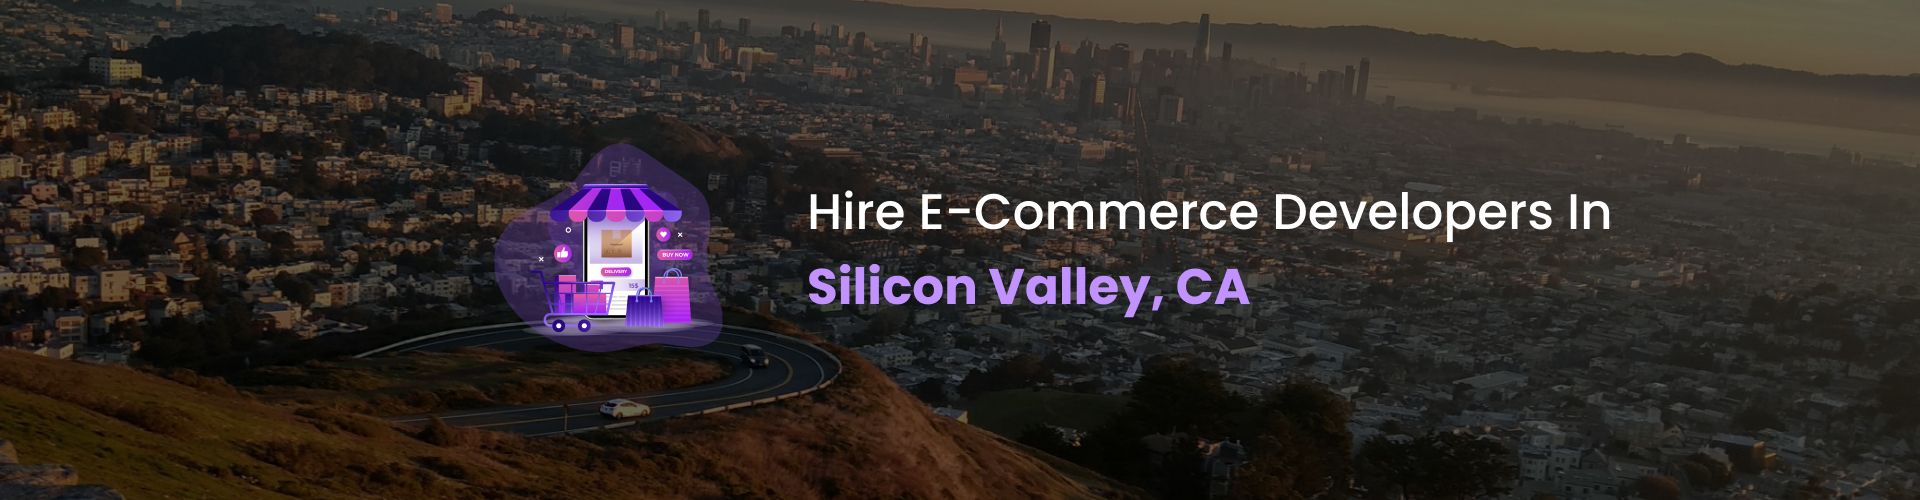 hire ecommerce developers in sillicon valley